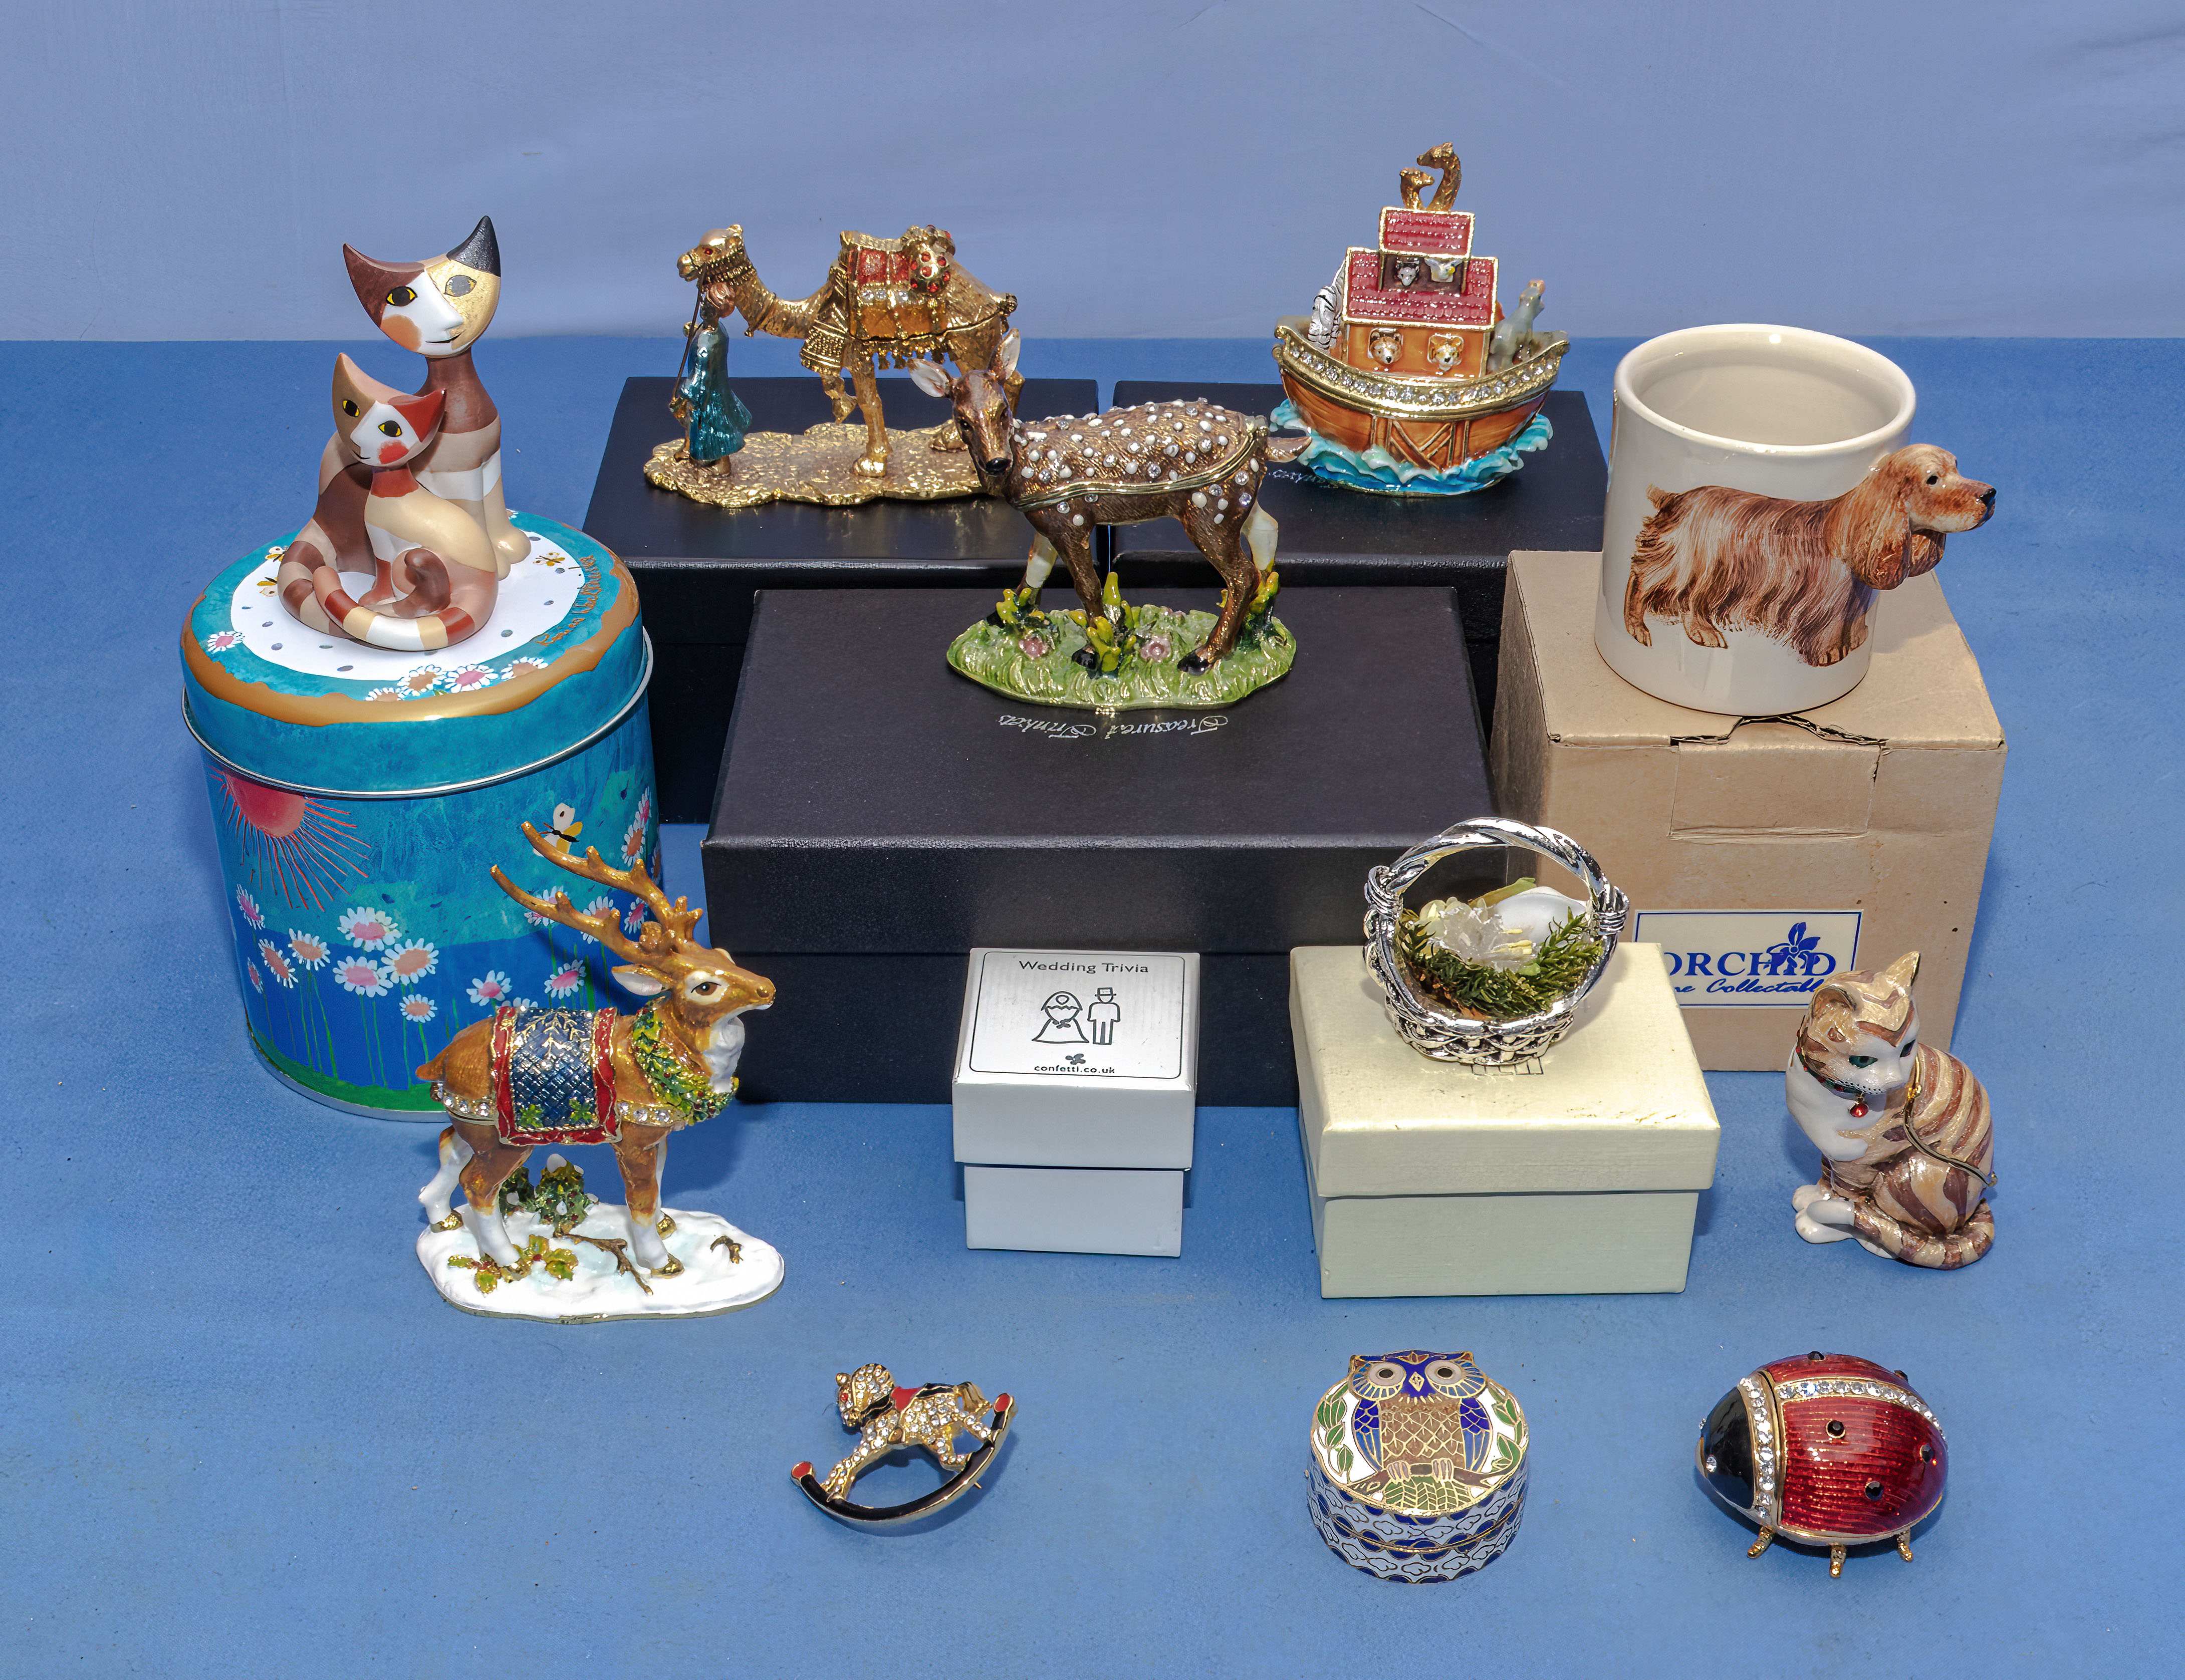 A collection of Treasured Trinkets and other collectable items